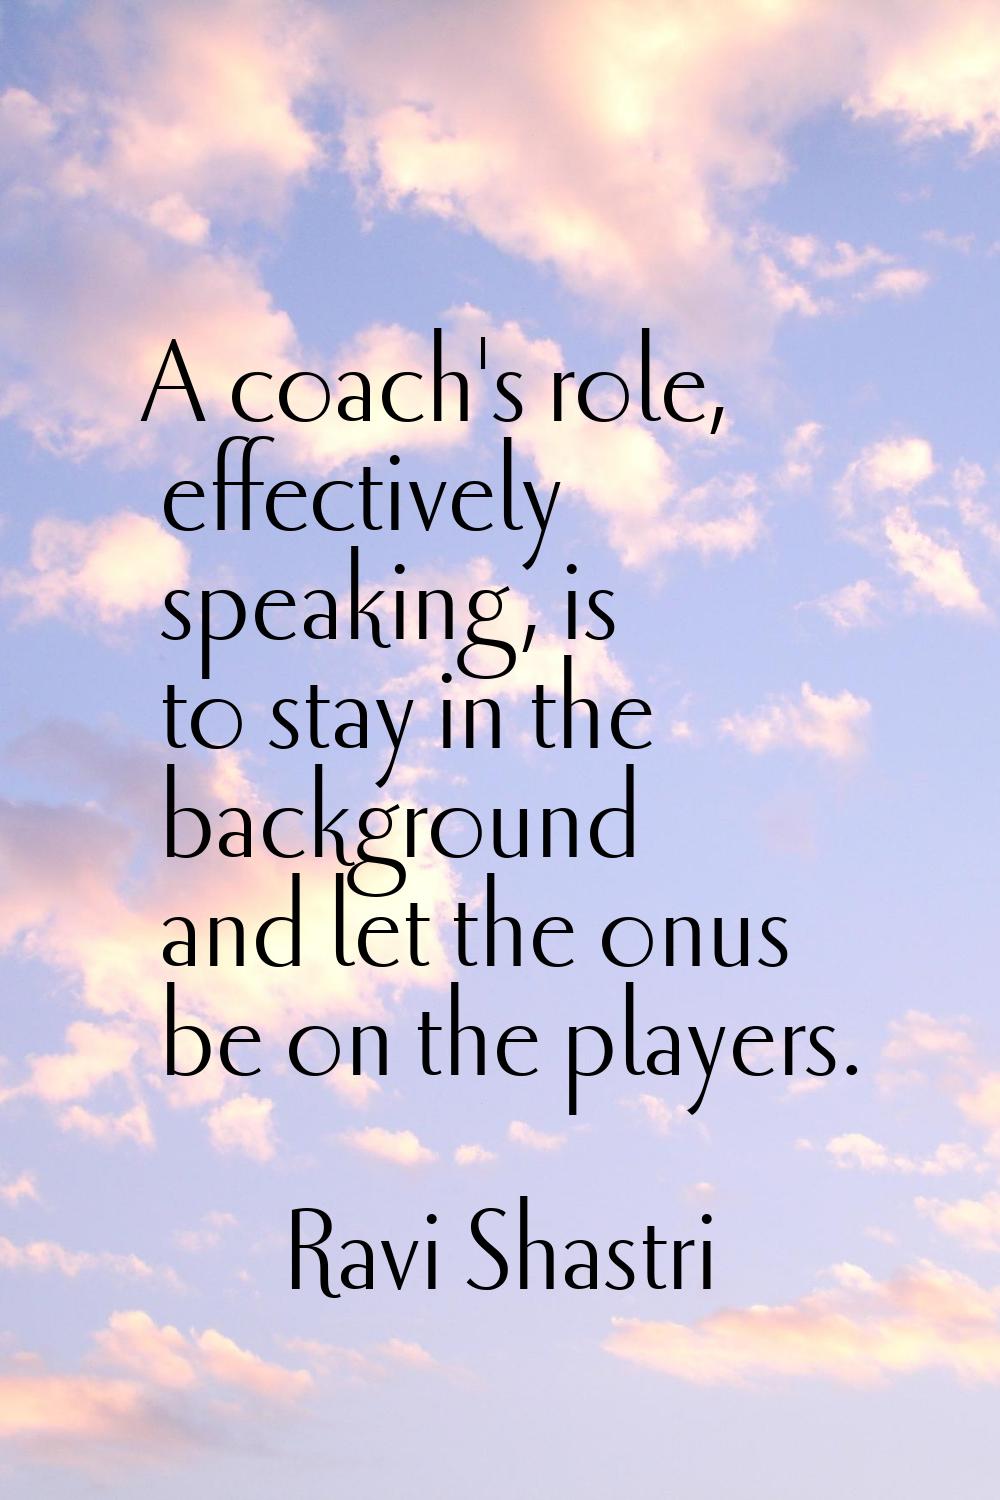 A coach's role, effectively speaking, is to stay in the background and let the onus be on the playe